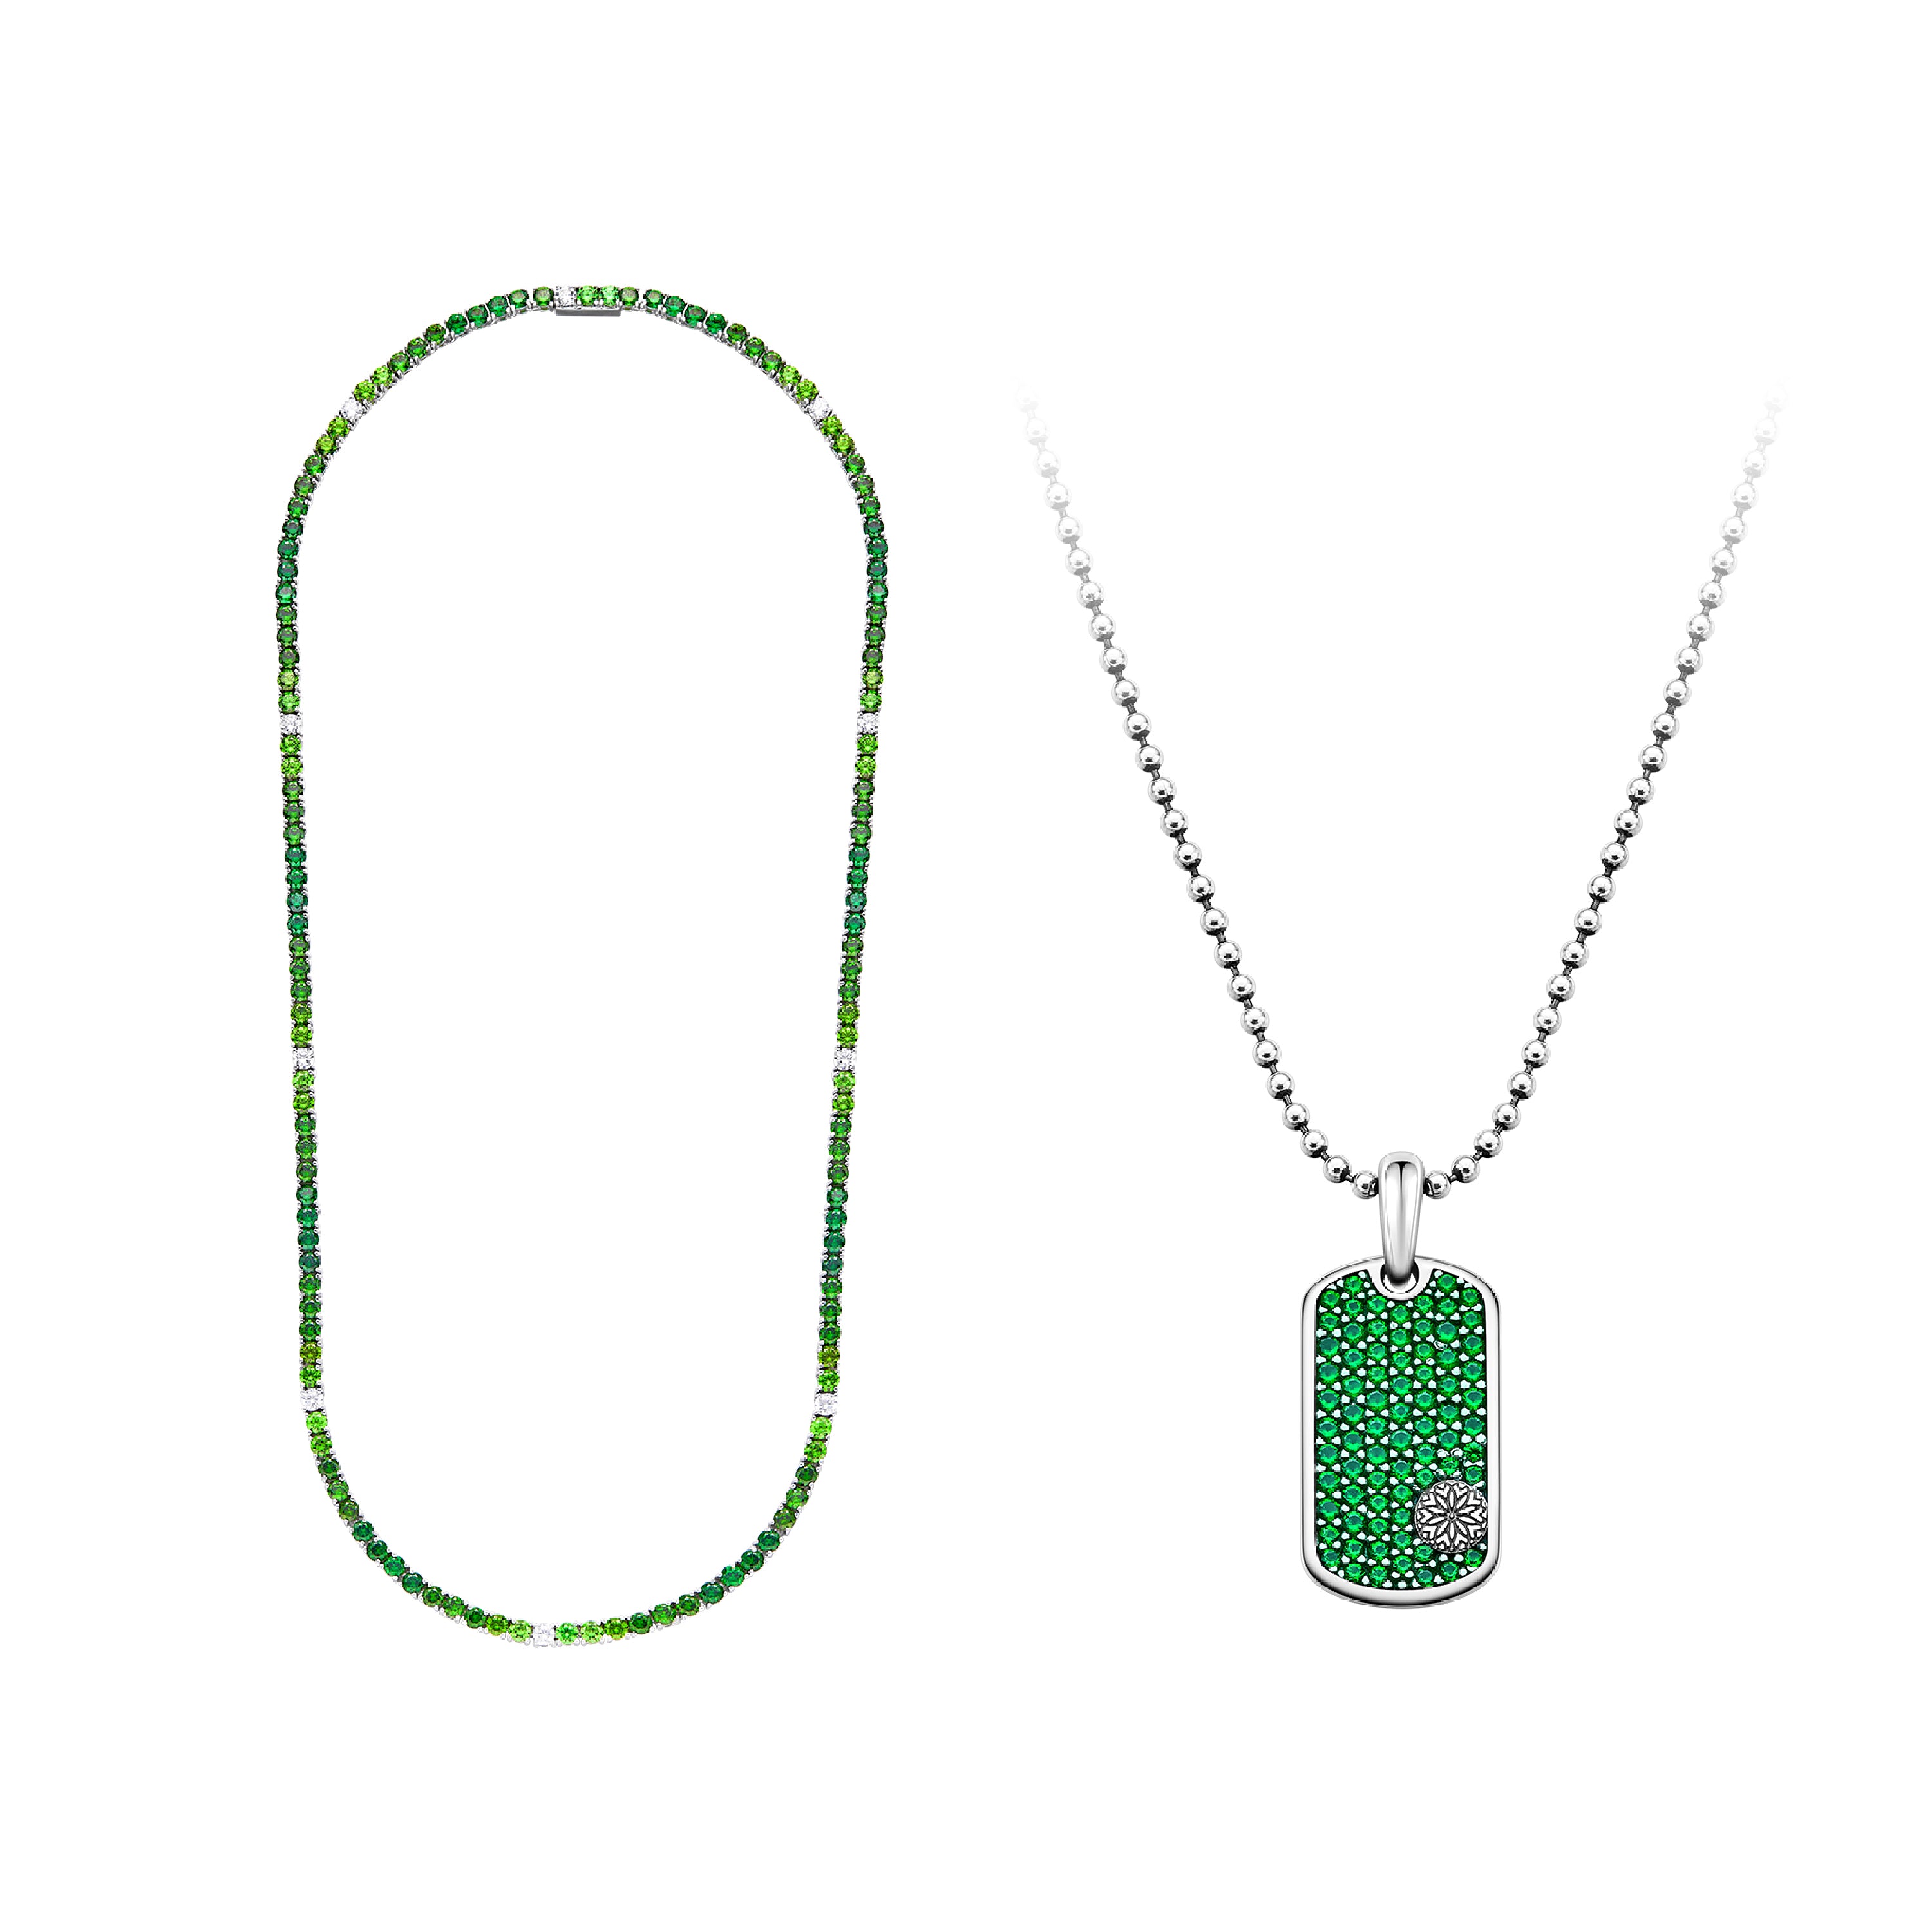 GREEN BRAVE TENNIS NECKLACE & GREEN CHERRY BLOSSOM TAG NECKLACE